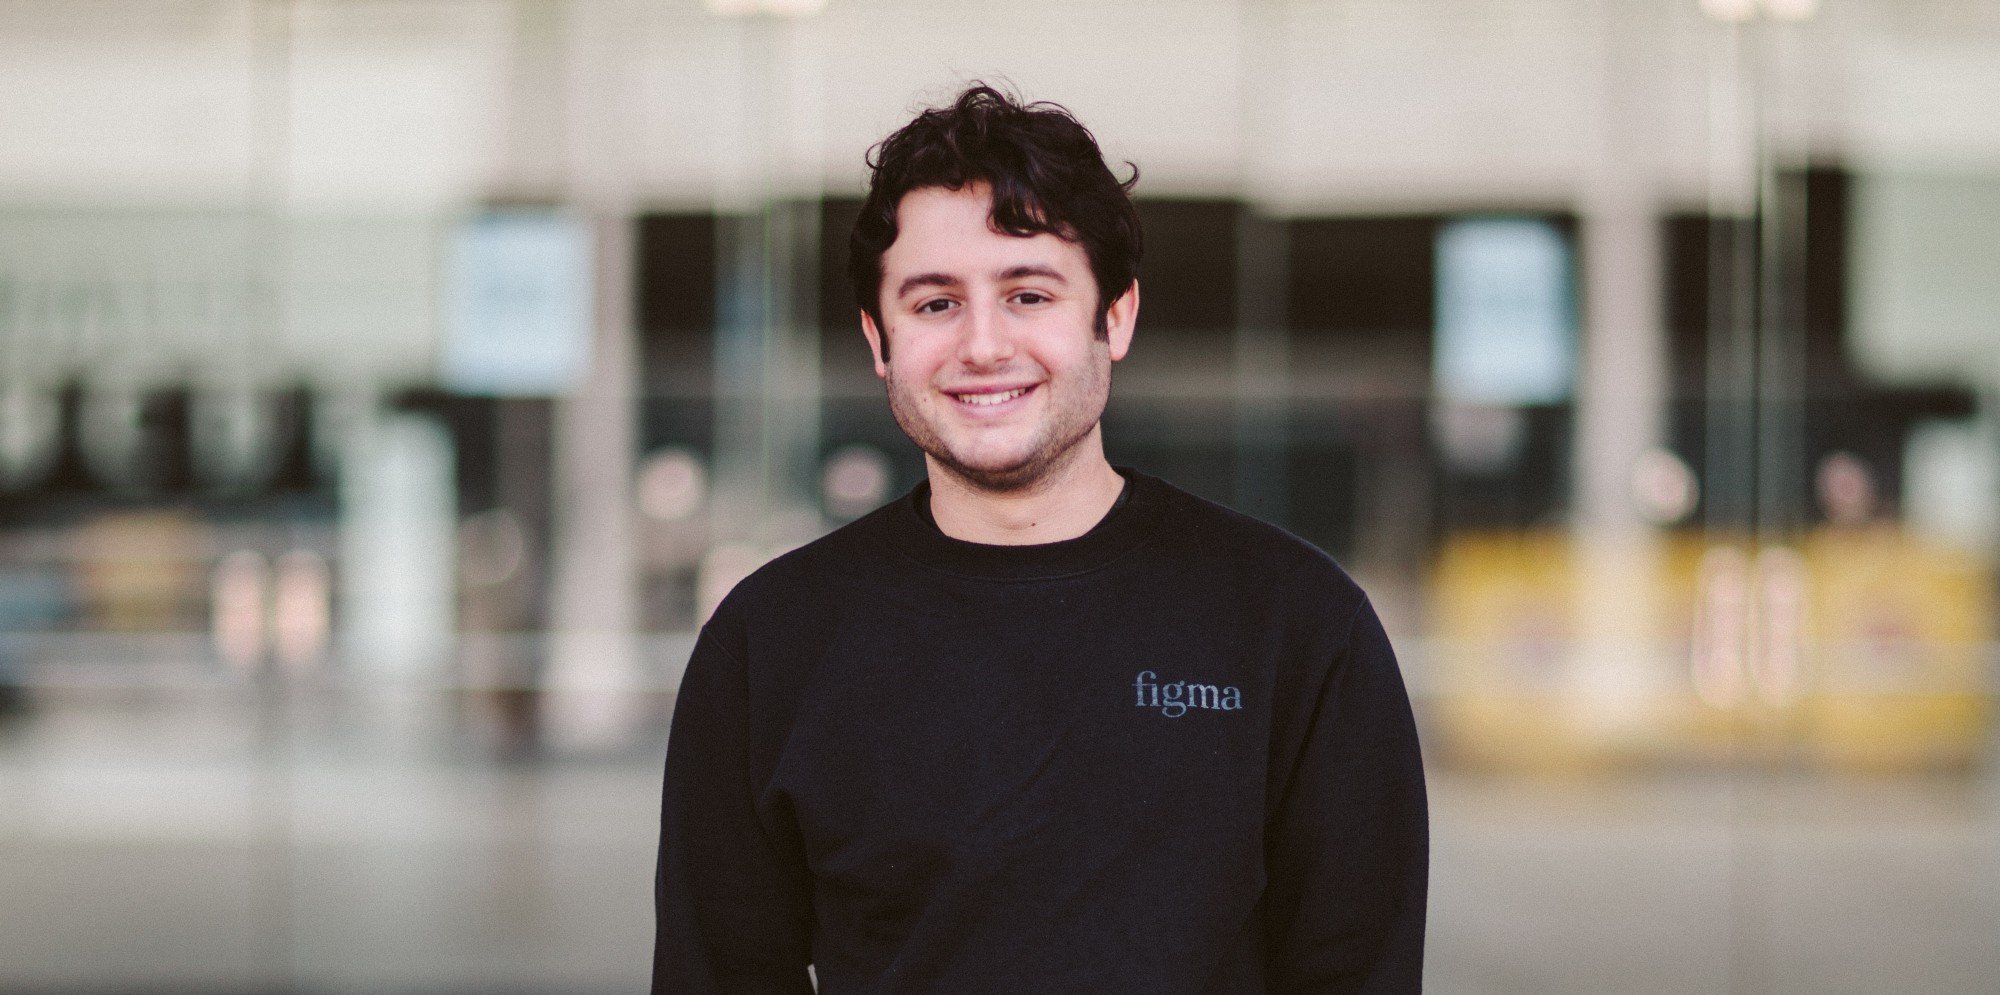 Figma CEO &amp; Co-founder Dylan Field